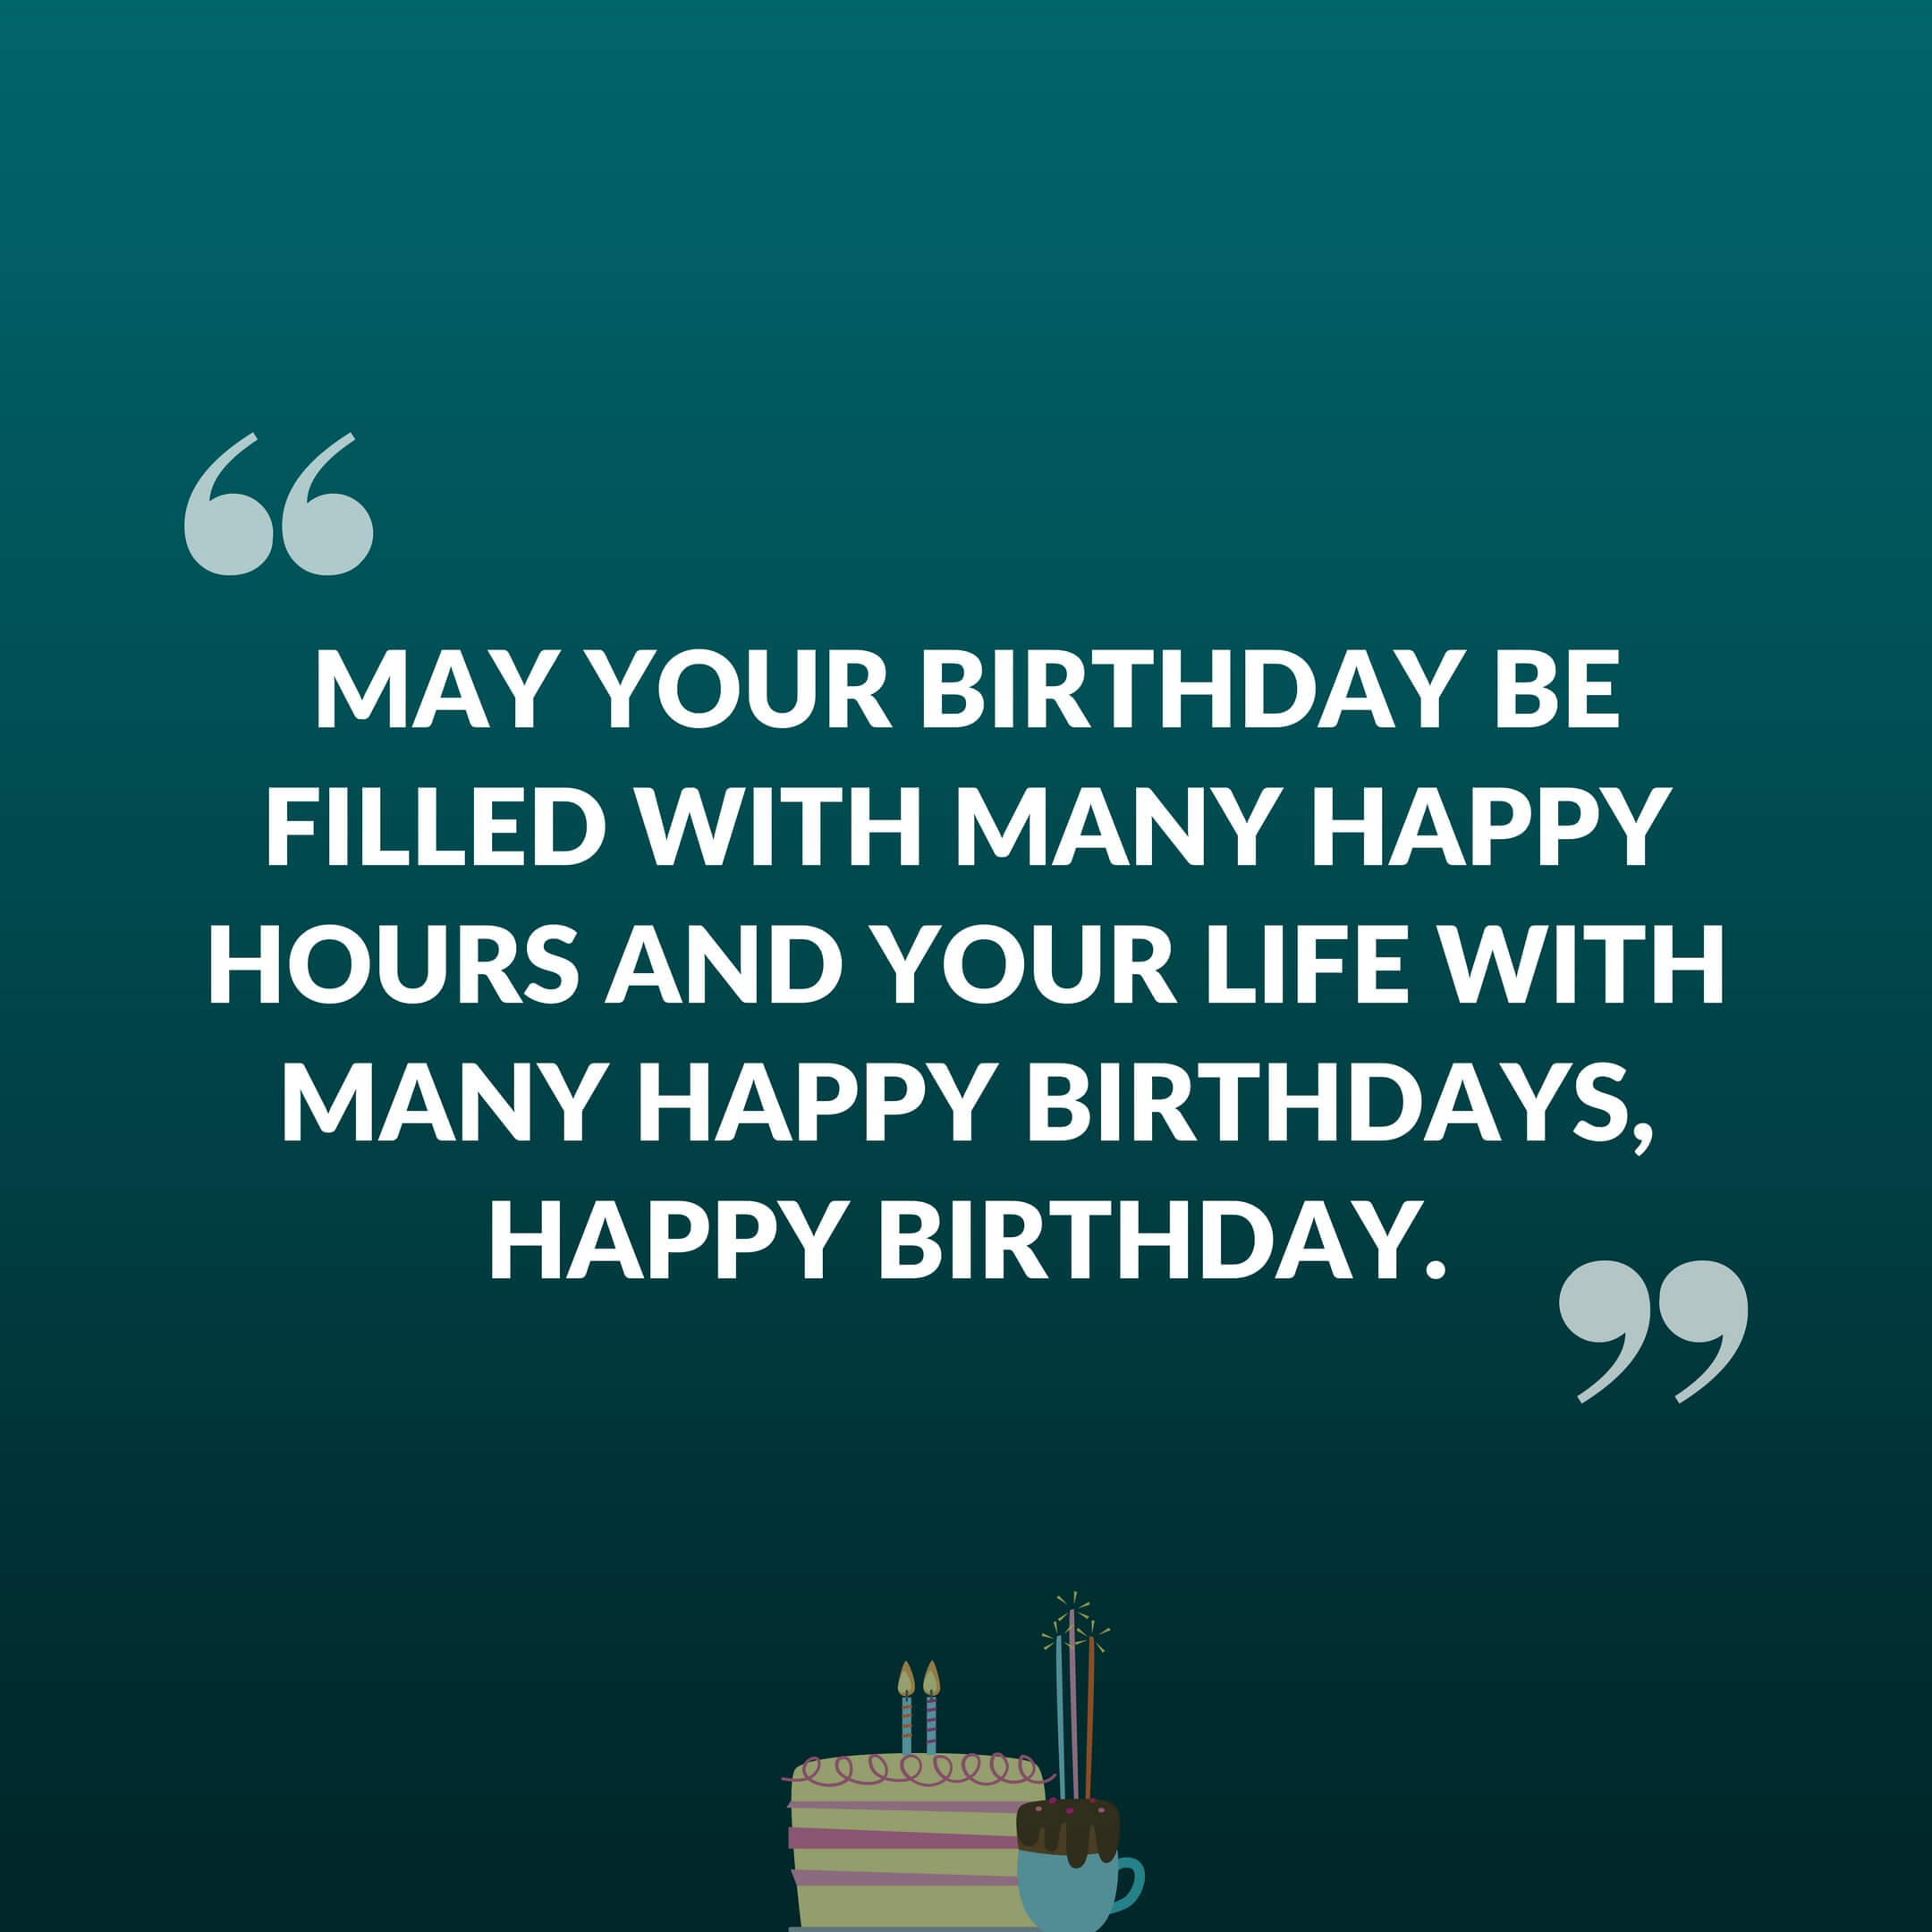 May your birthday be filled with many happy hours and your life with many happy birthdays , Happy birthday.